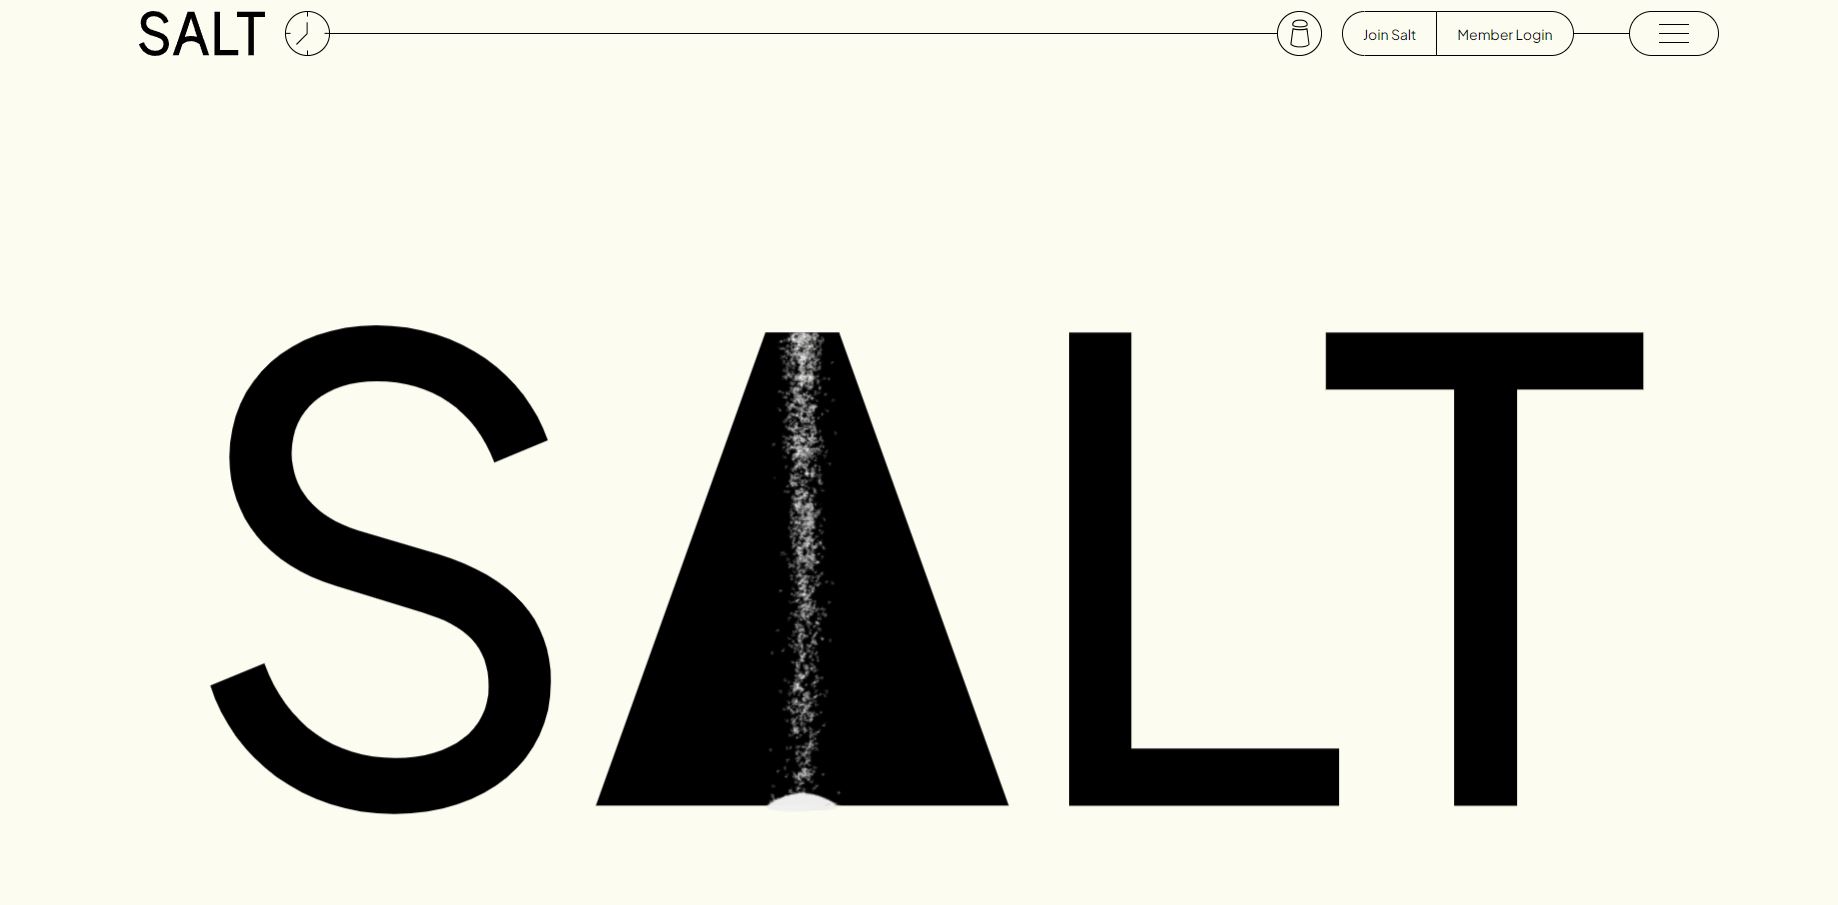 With $10M in pre-seed funding from investors, Salt Labs is taking the financial services industry by storm